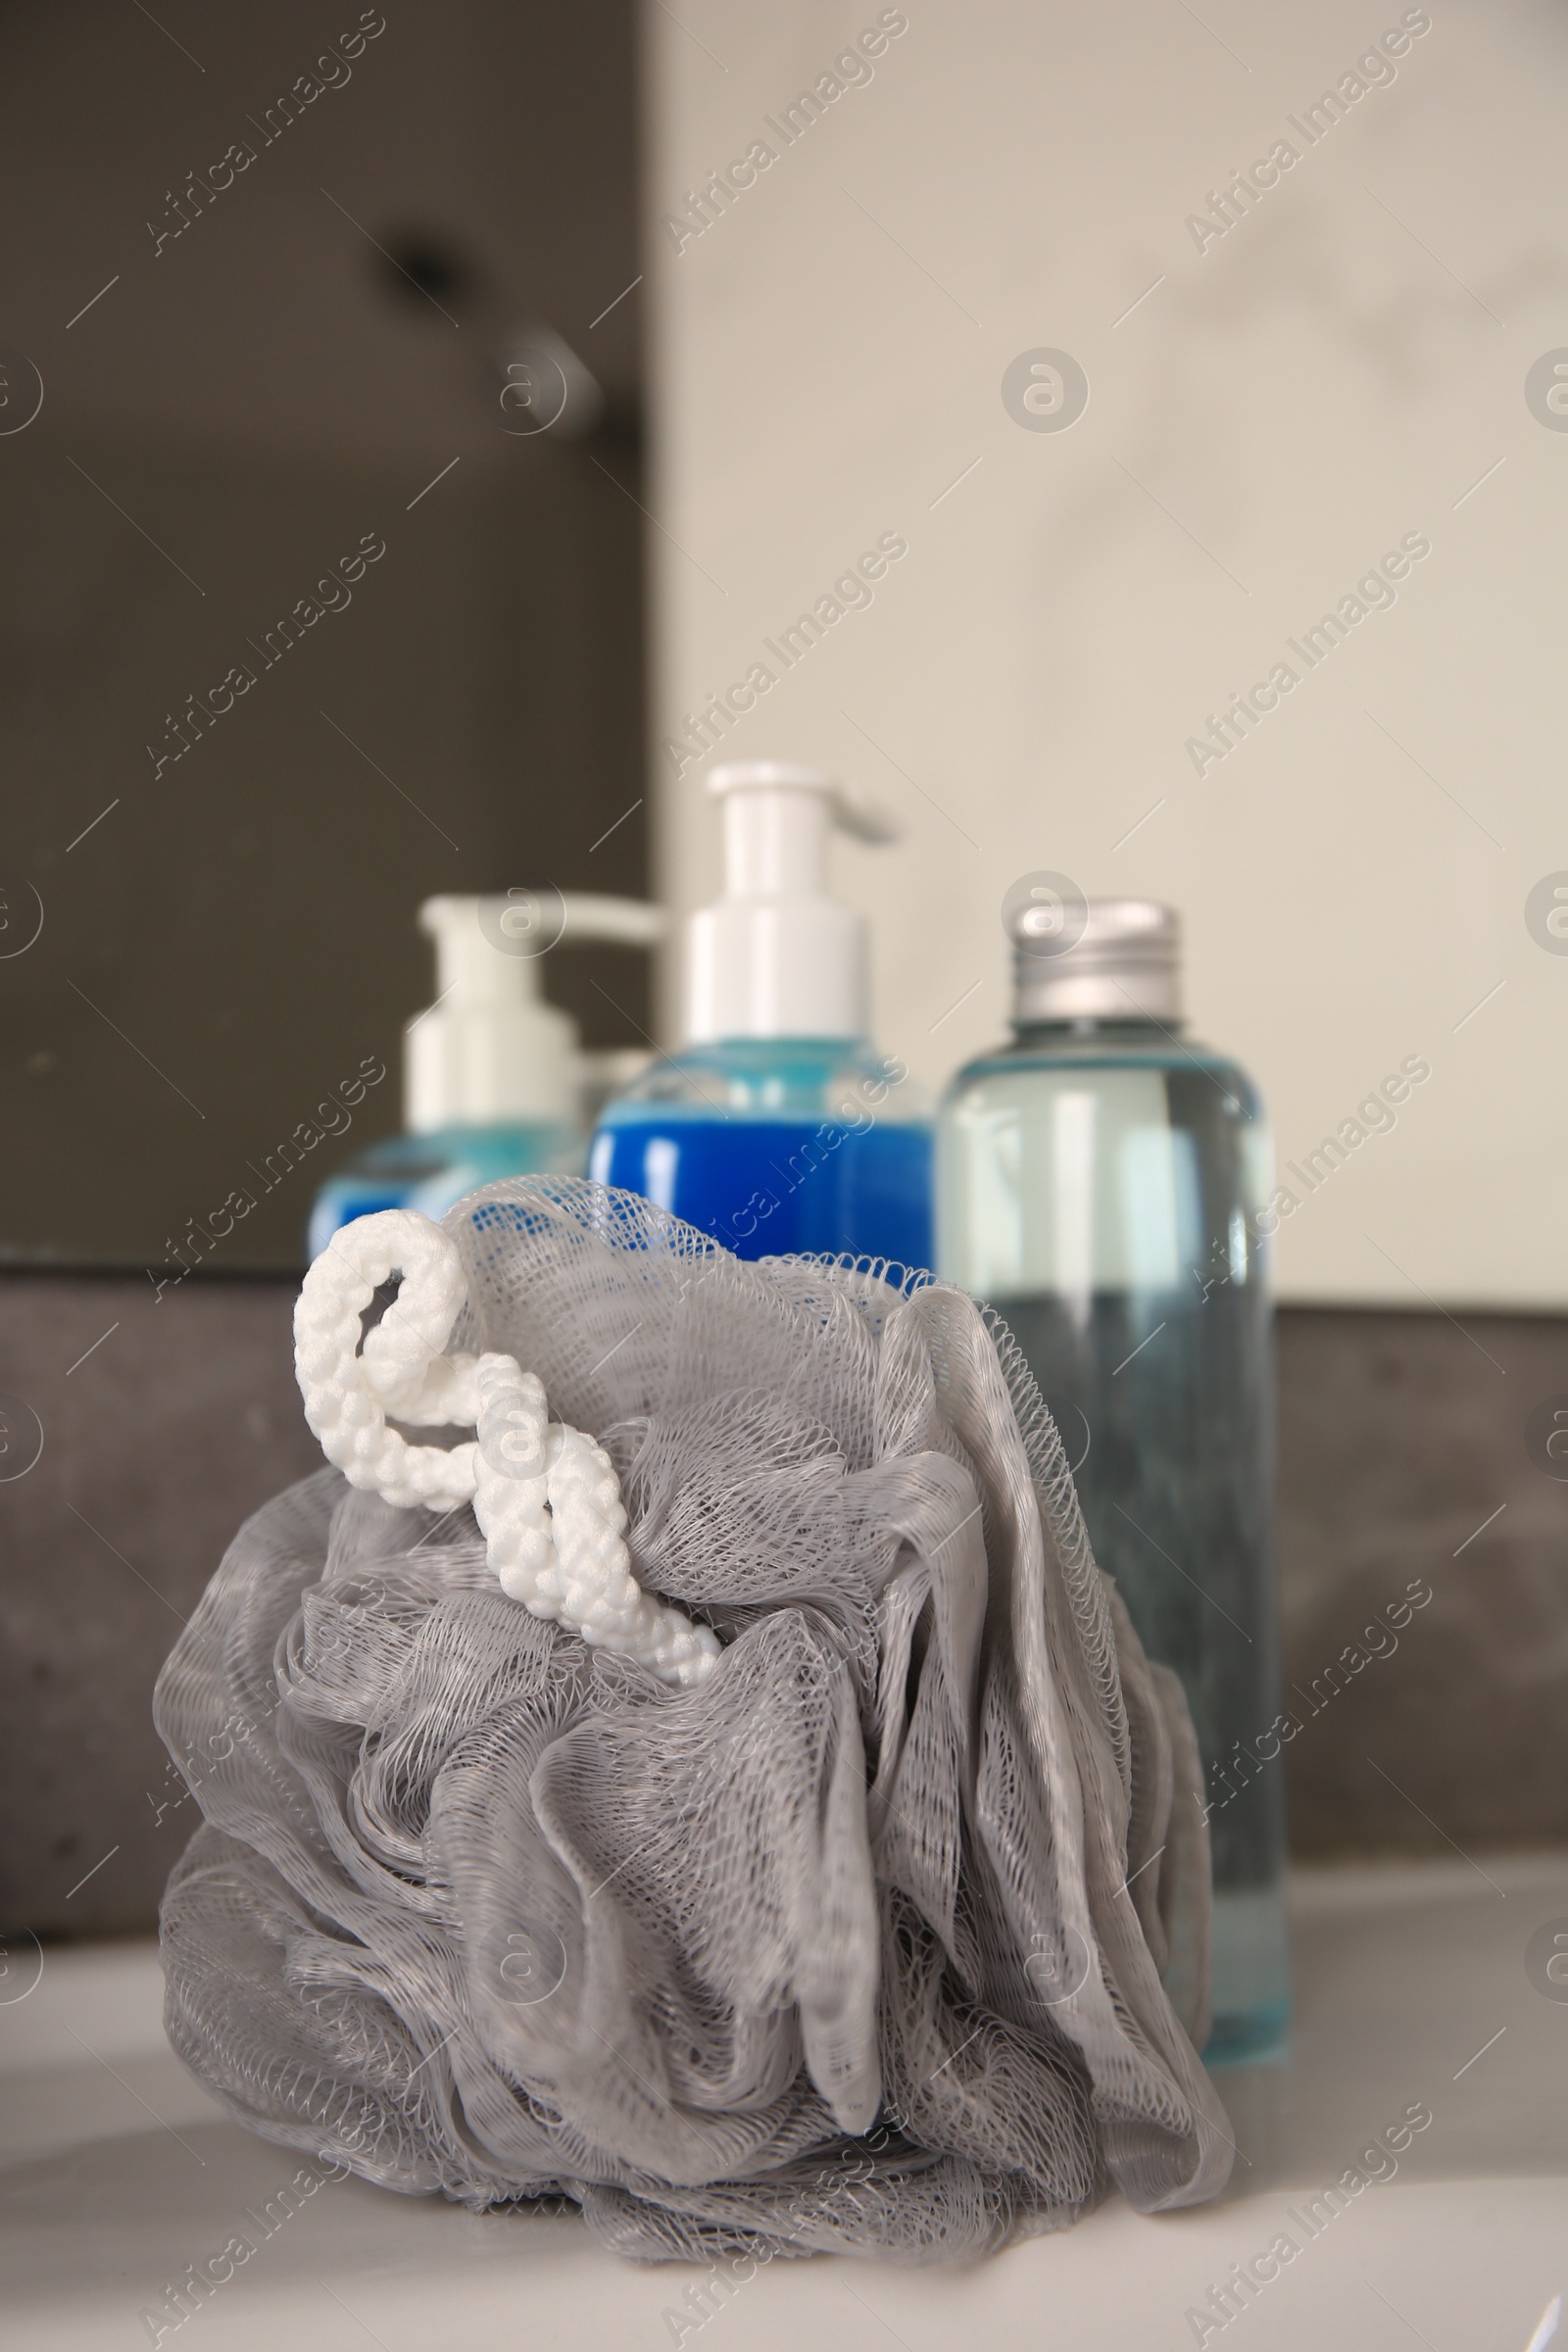 Photo of Grey shower puff and cosmetic products on washbasin in bathroom